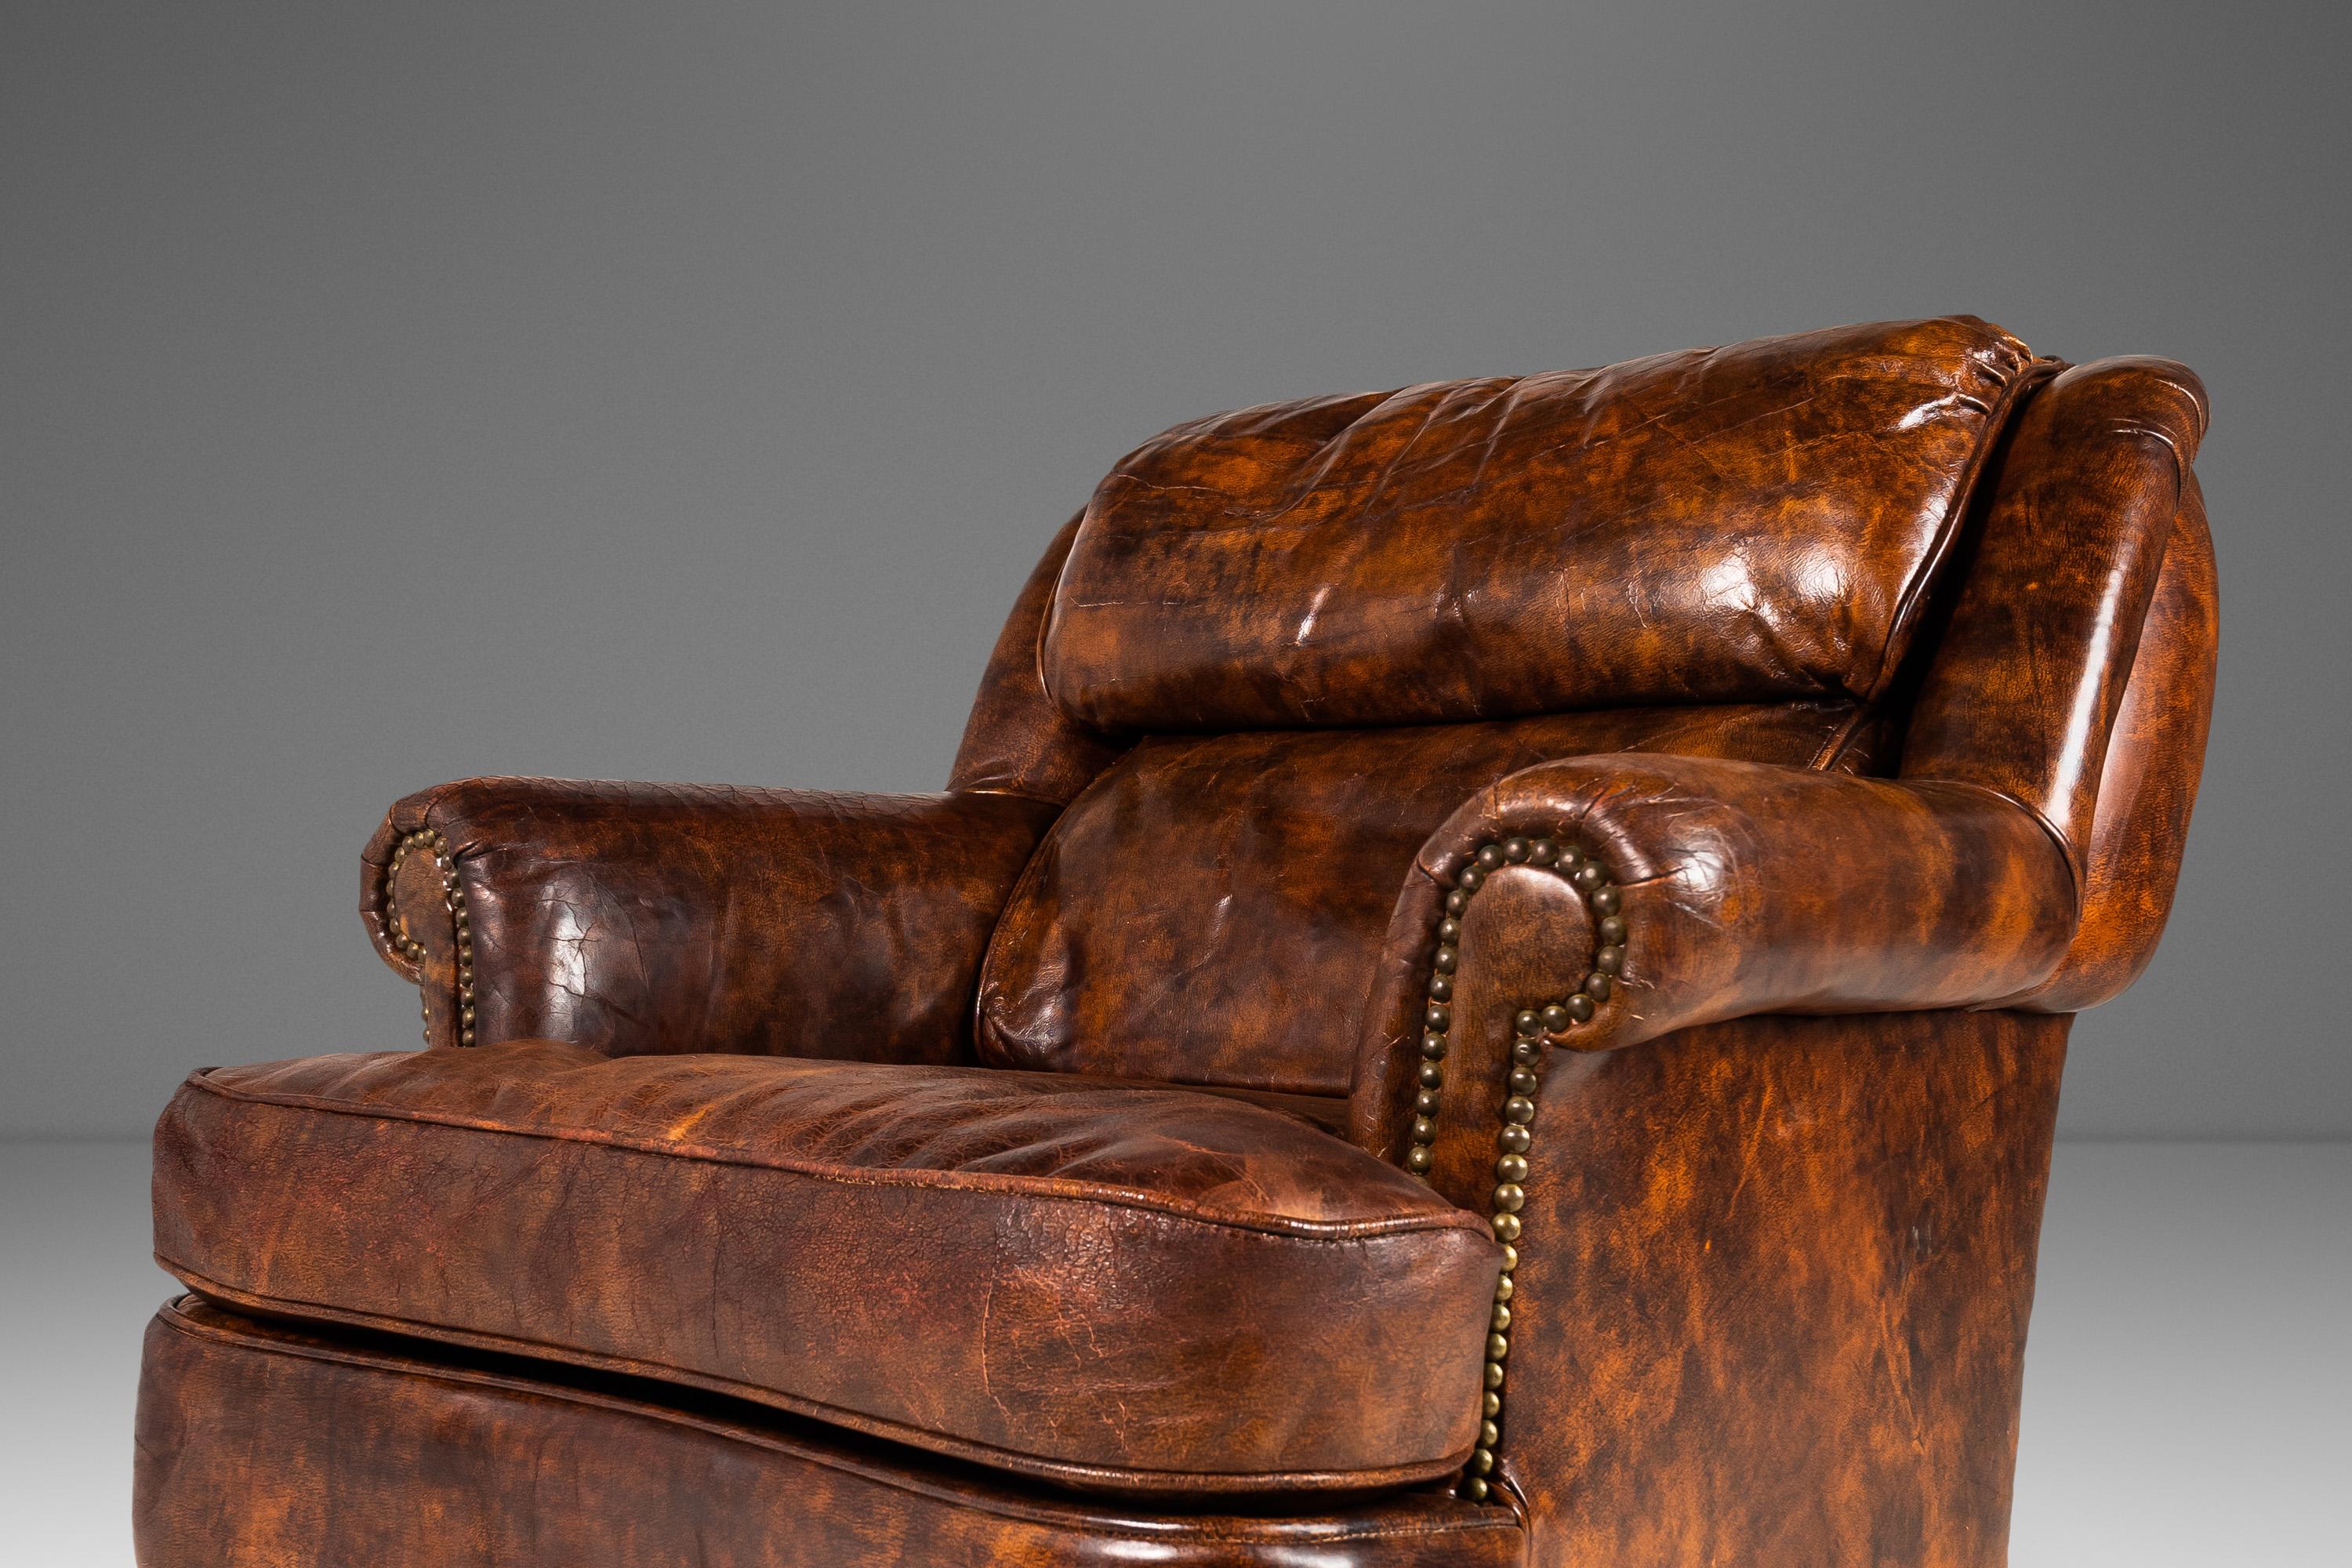 Patinaed French Club Chair Cigar Chair & Ottoman in Distressed Leather c. 1940s For Sale 2